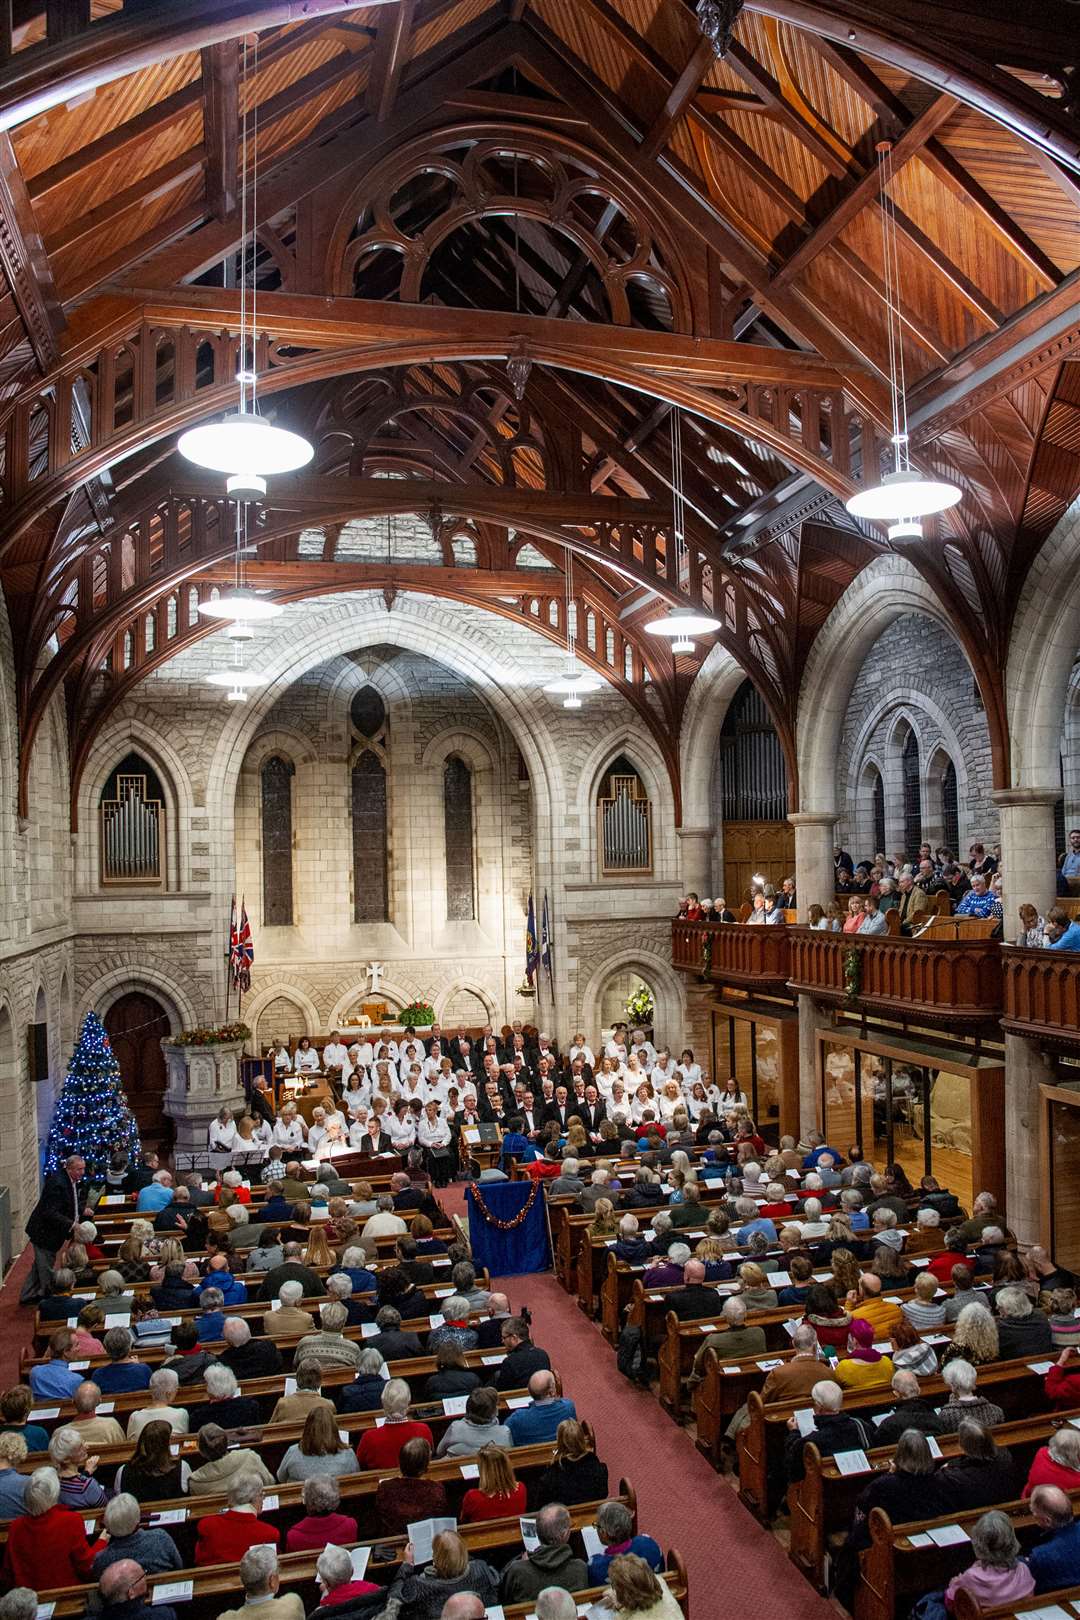 After 127 public performances over 48 years the Culbin Singers say farewell with their final Christmas Concert held at St Laurence Church.